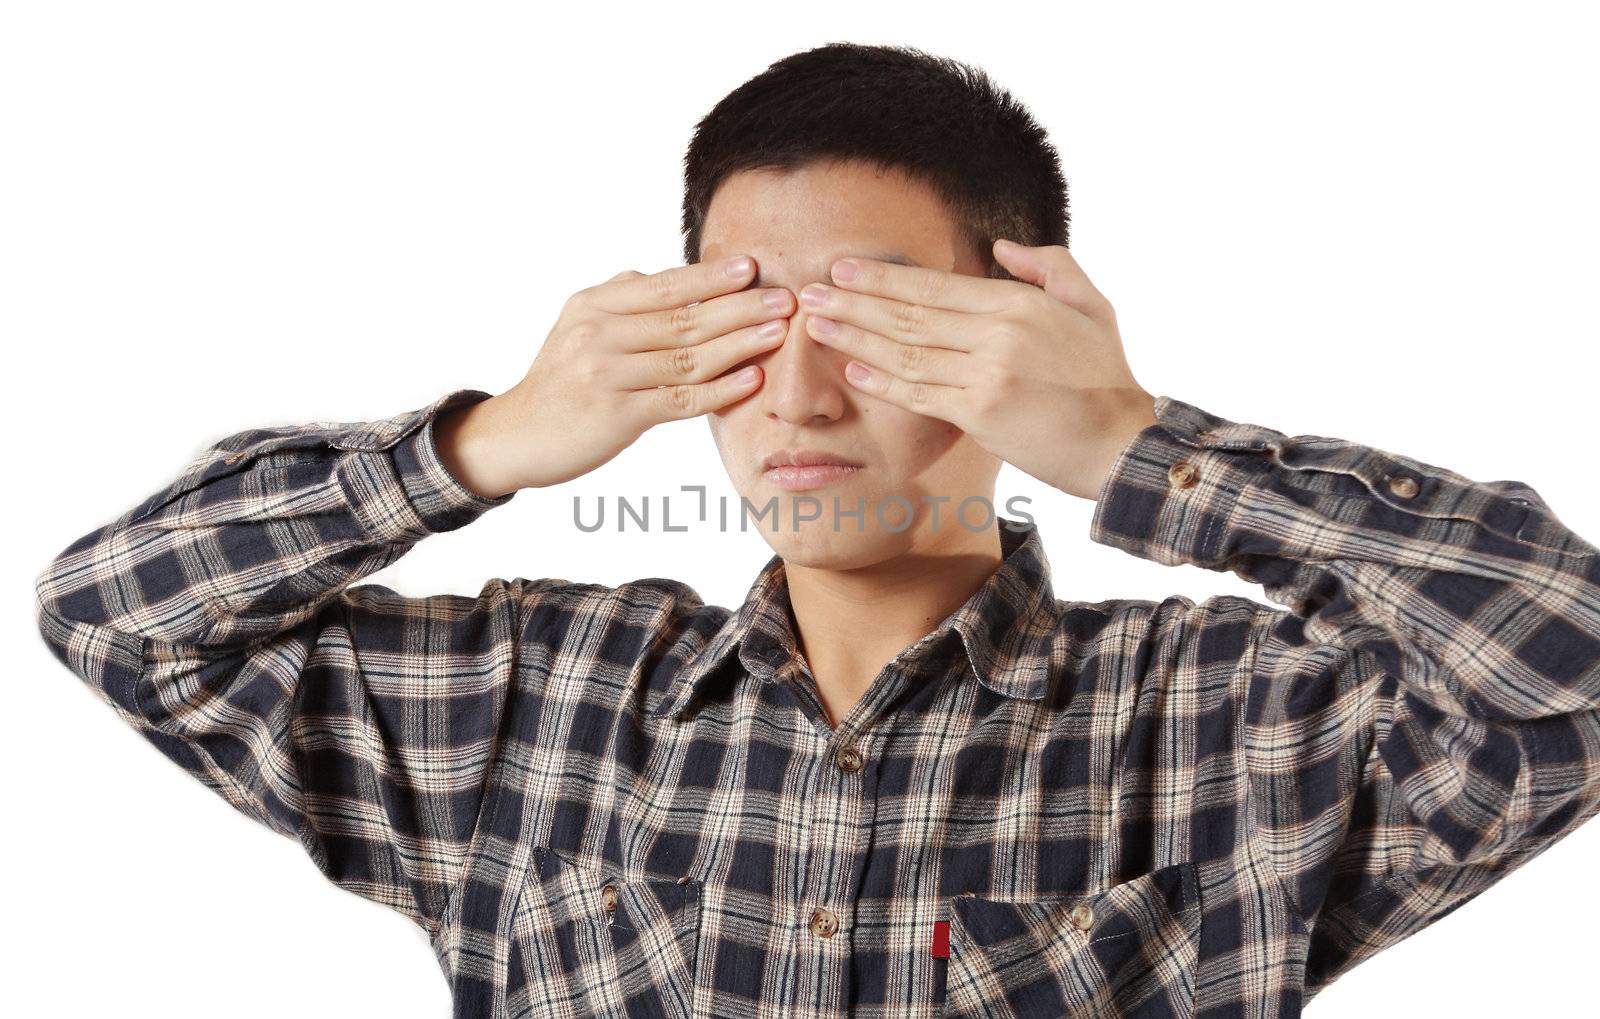 Portrait of a young man covering his eyes with hands  by cozyta